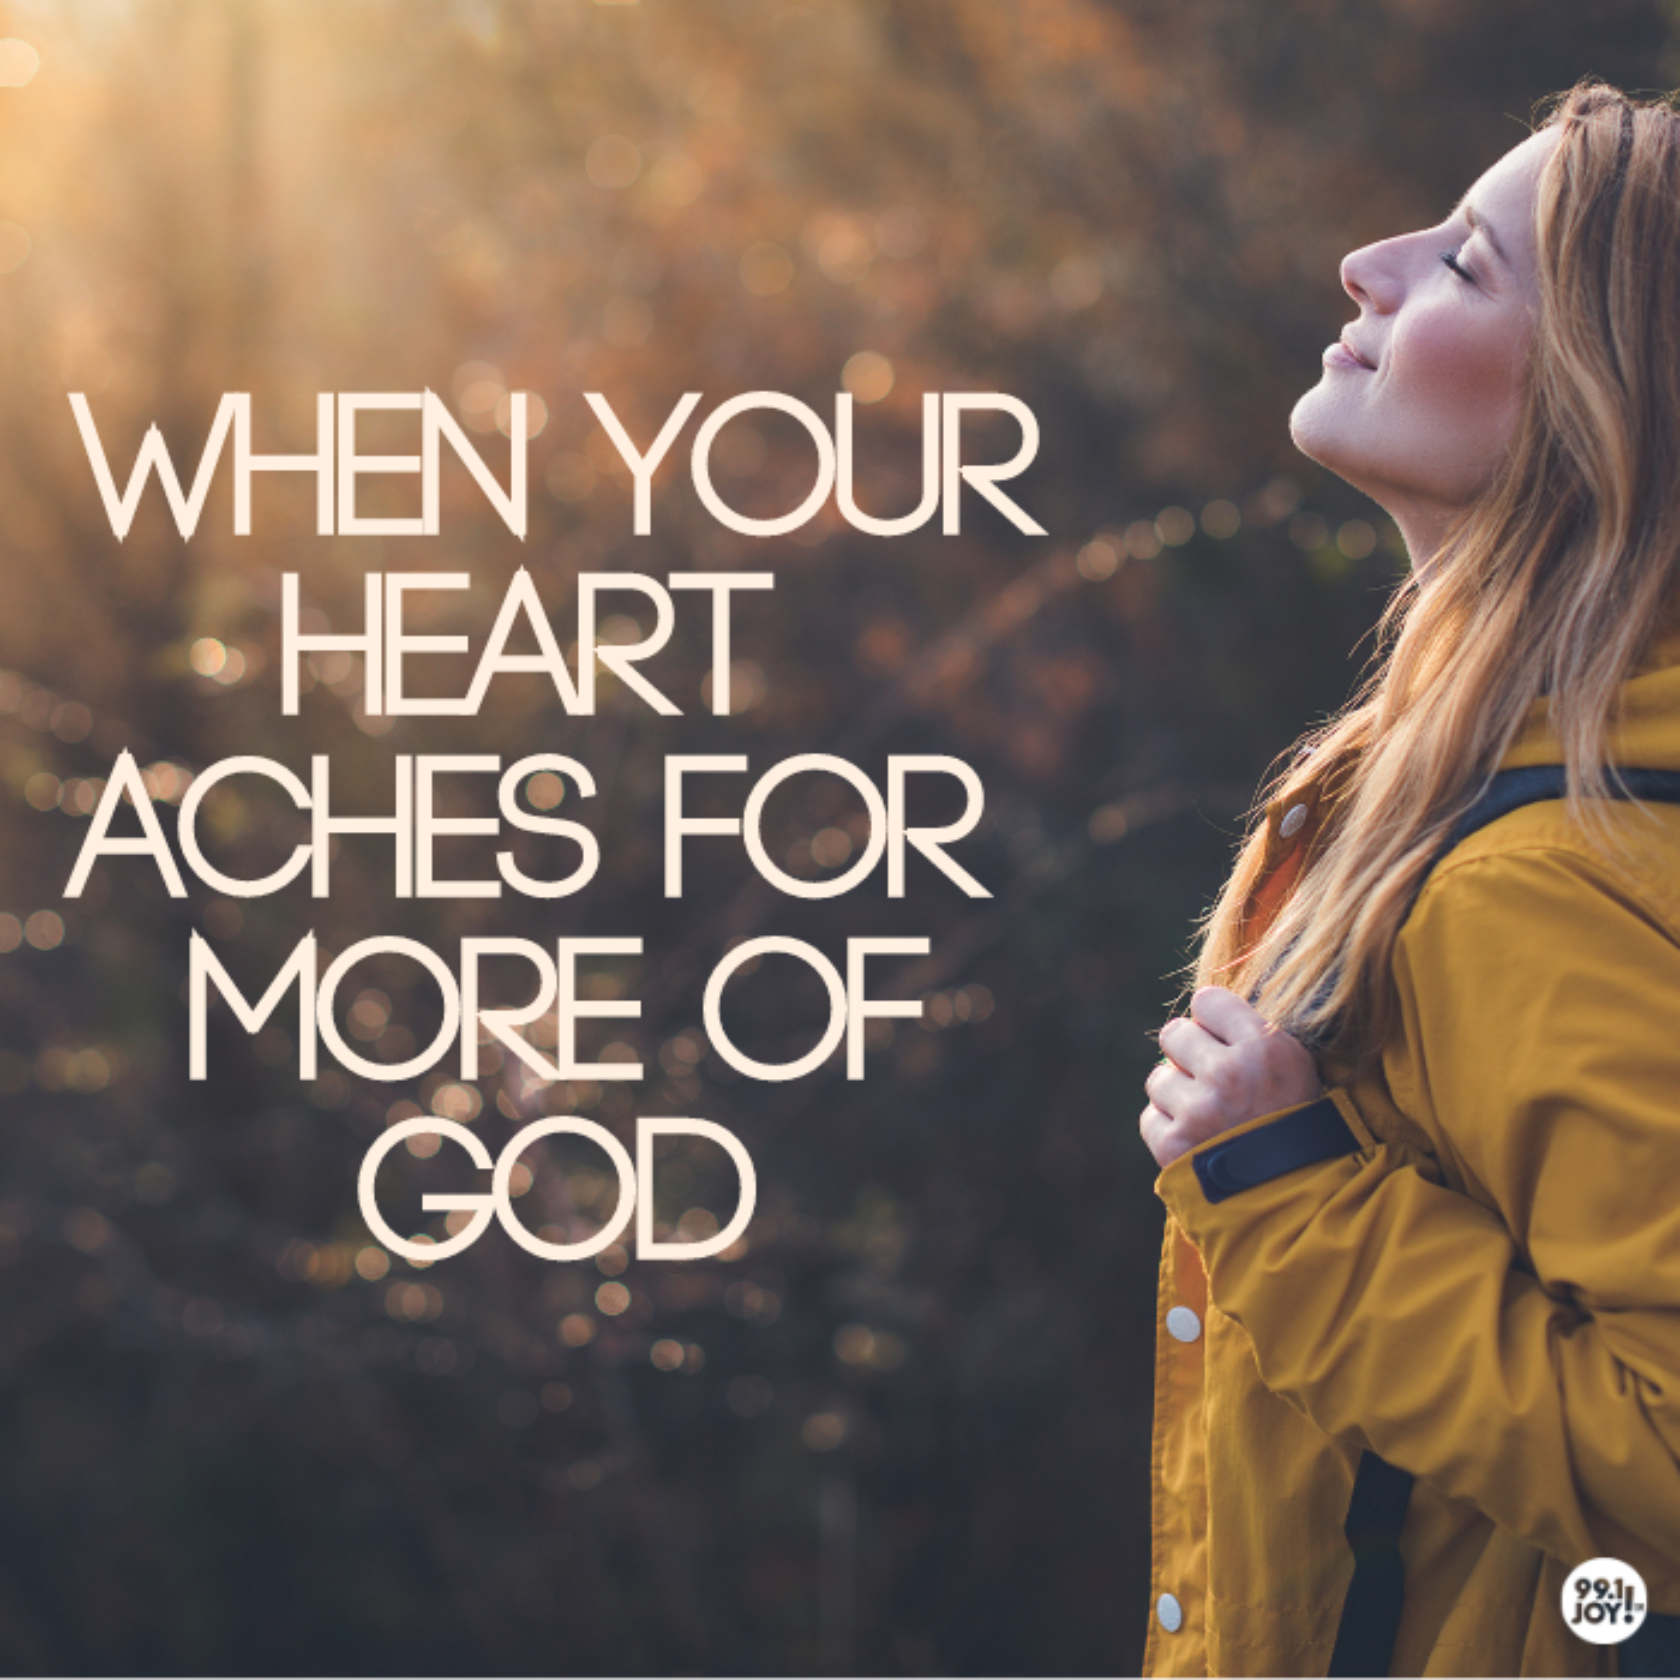 When Your Heart Aches For More Of God